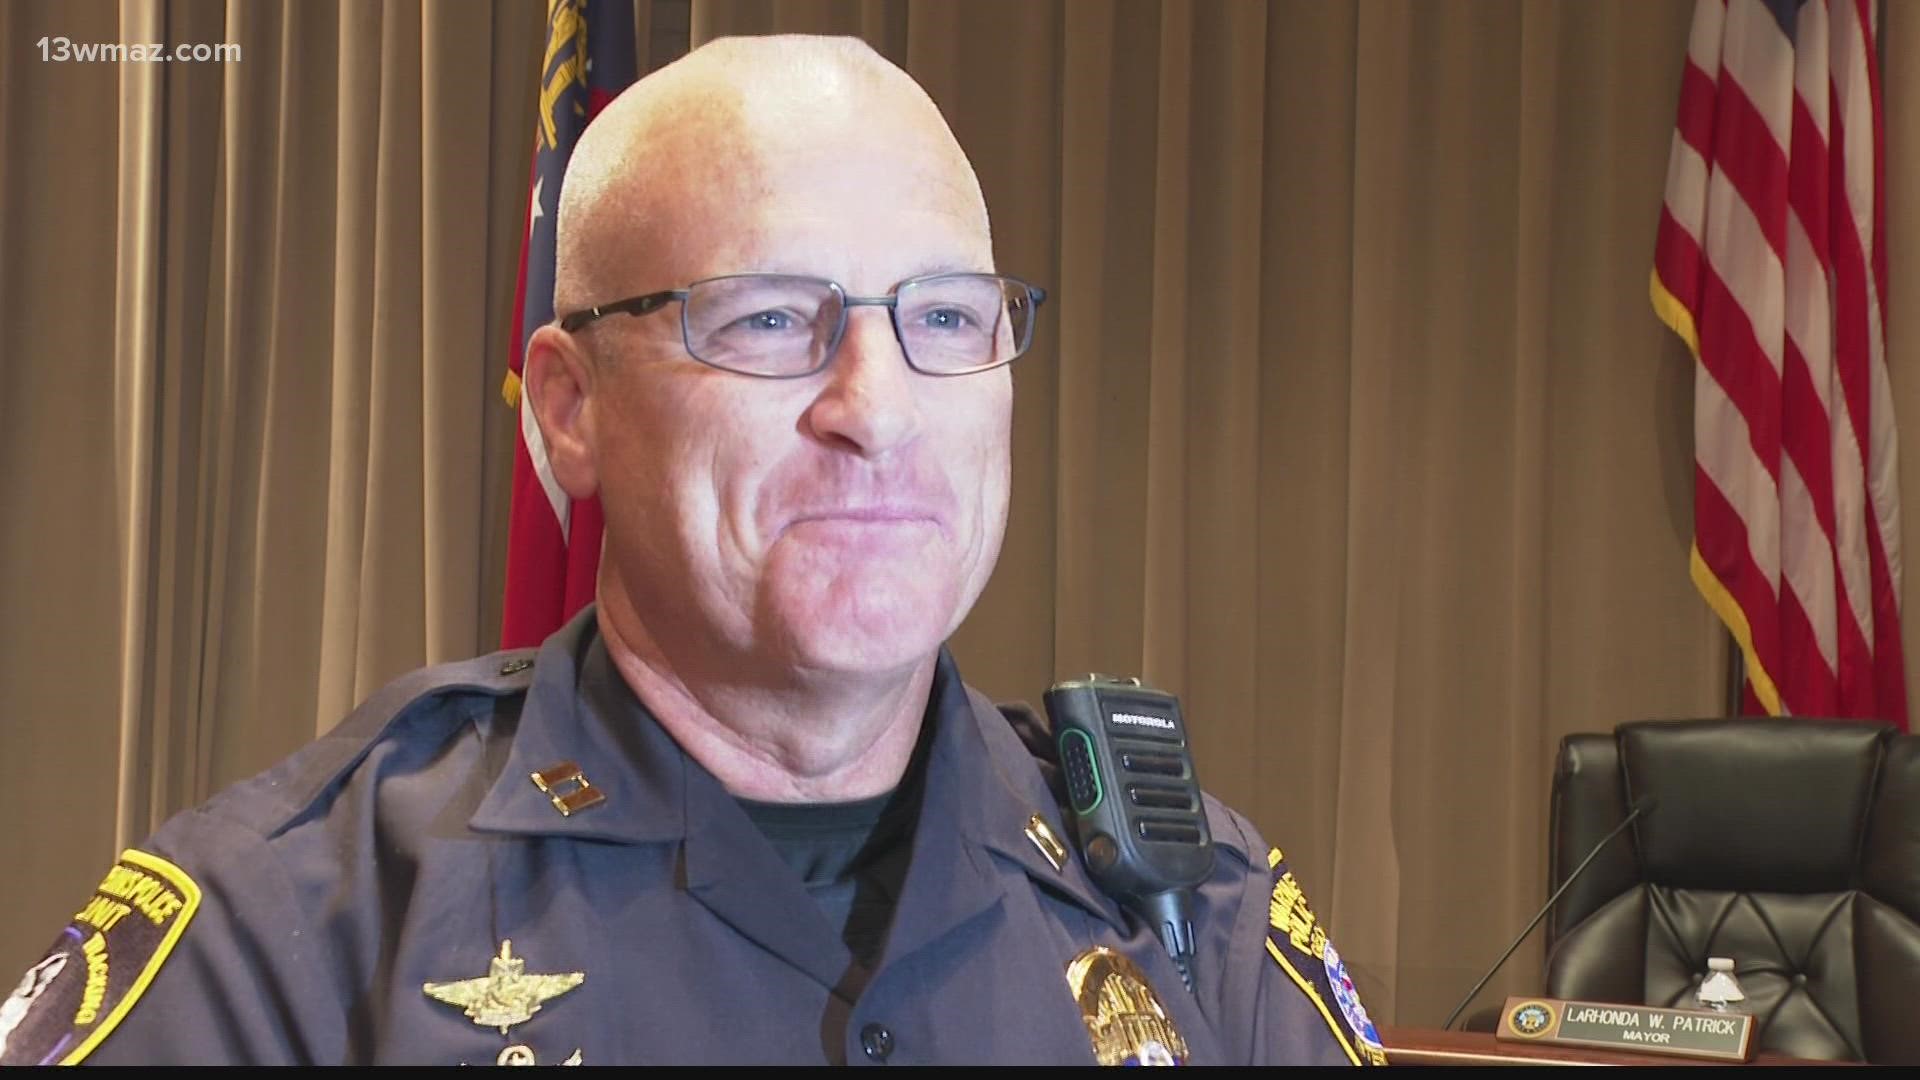 The change comes after Chief John Wagner announced his retirement around two weeks ago.